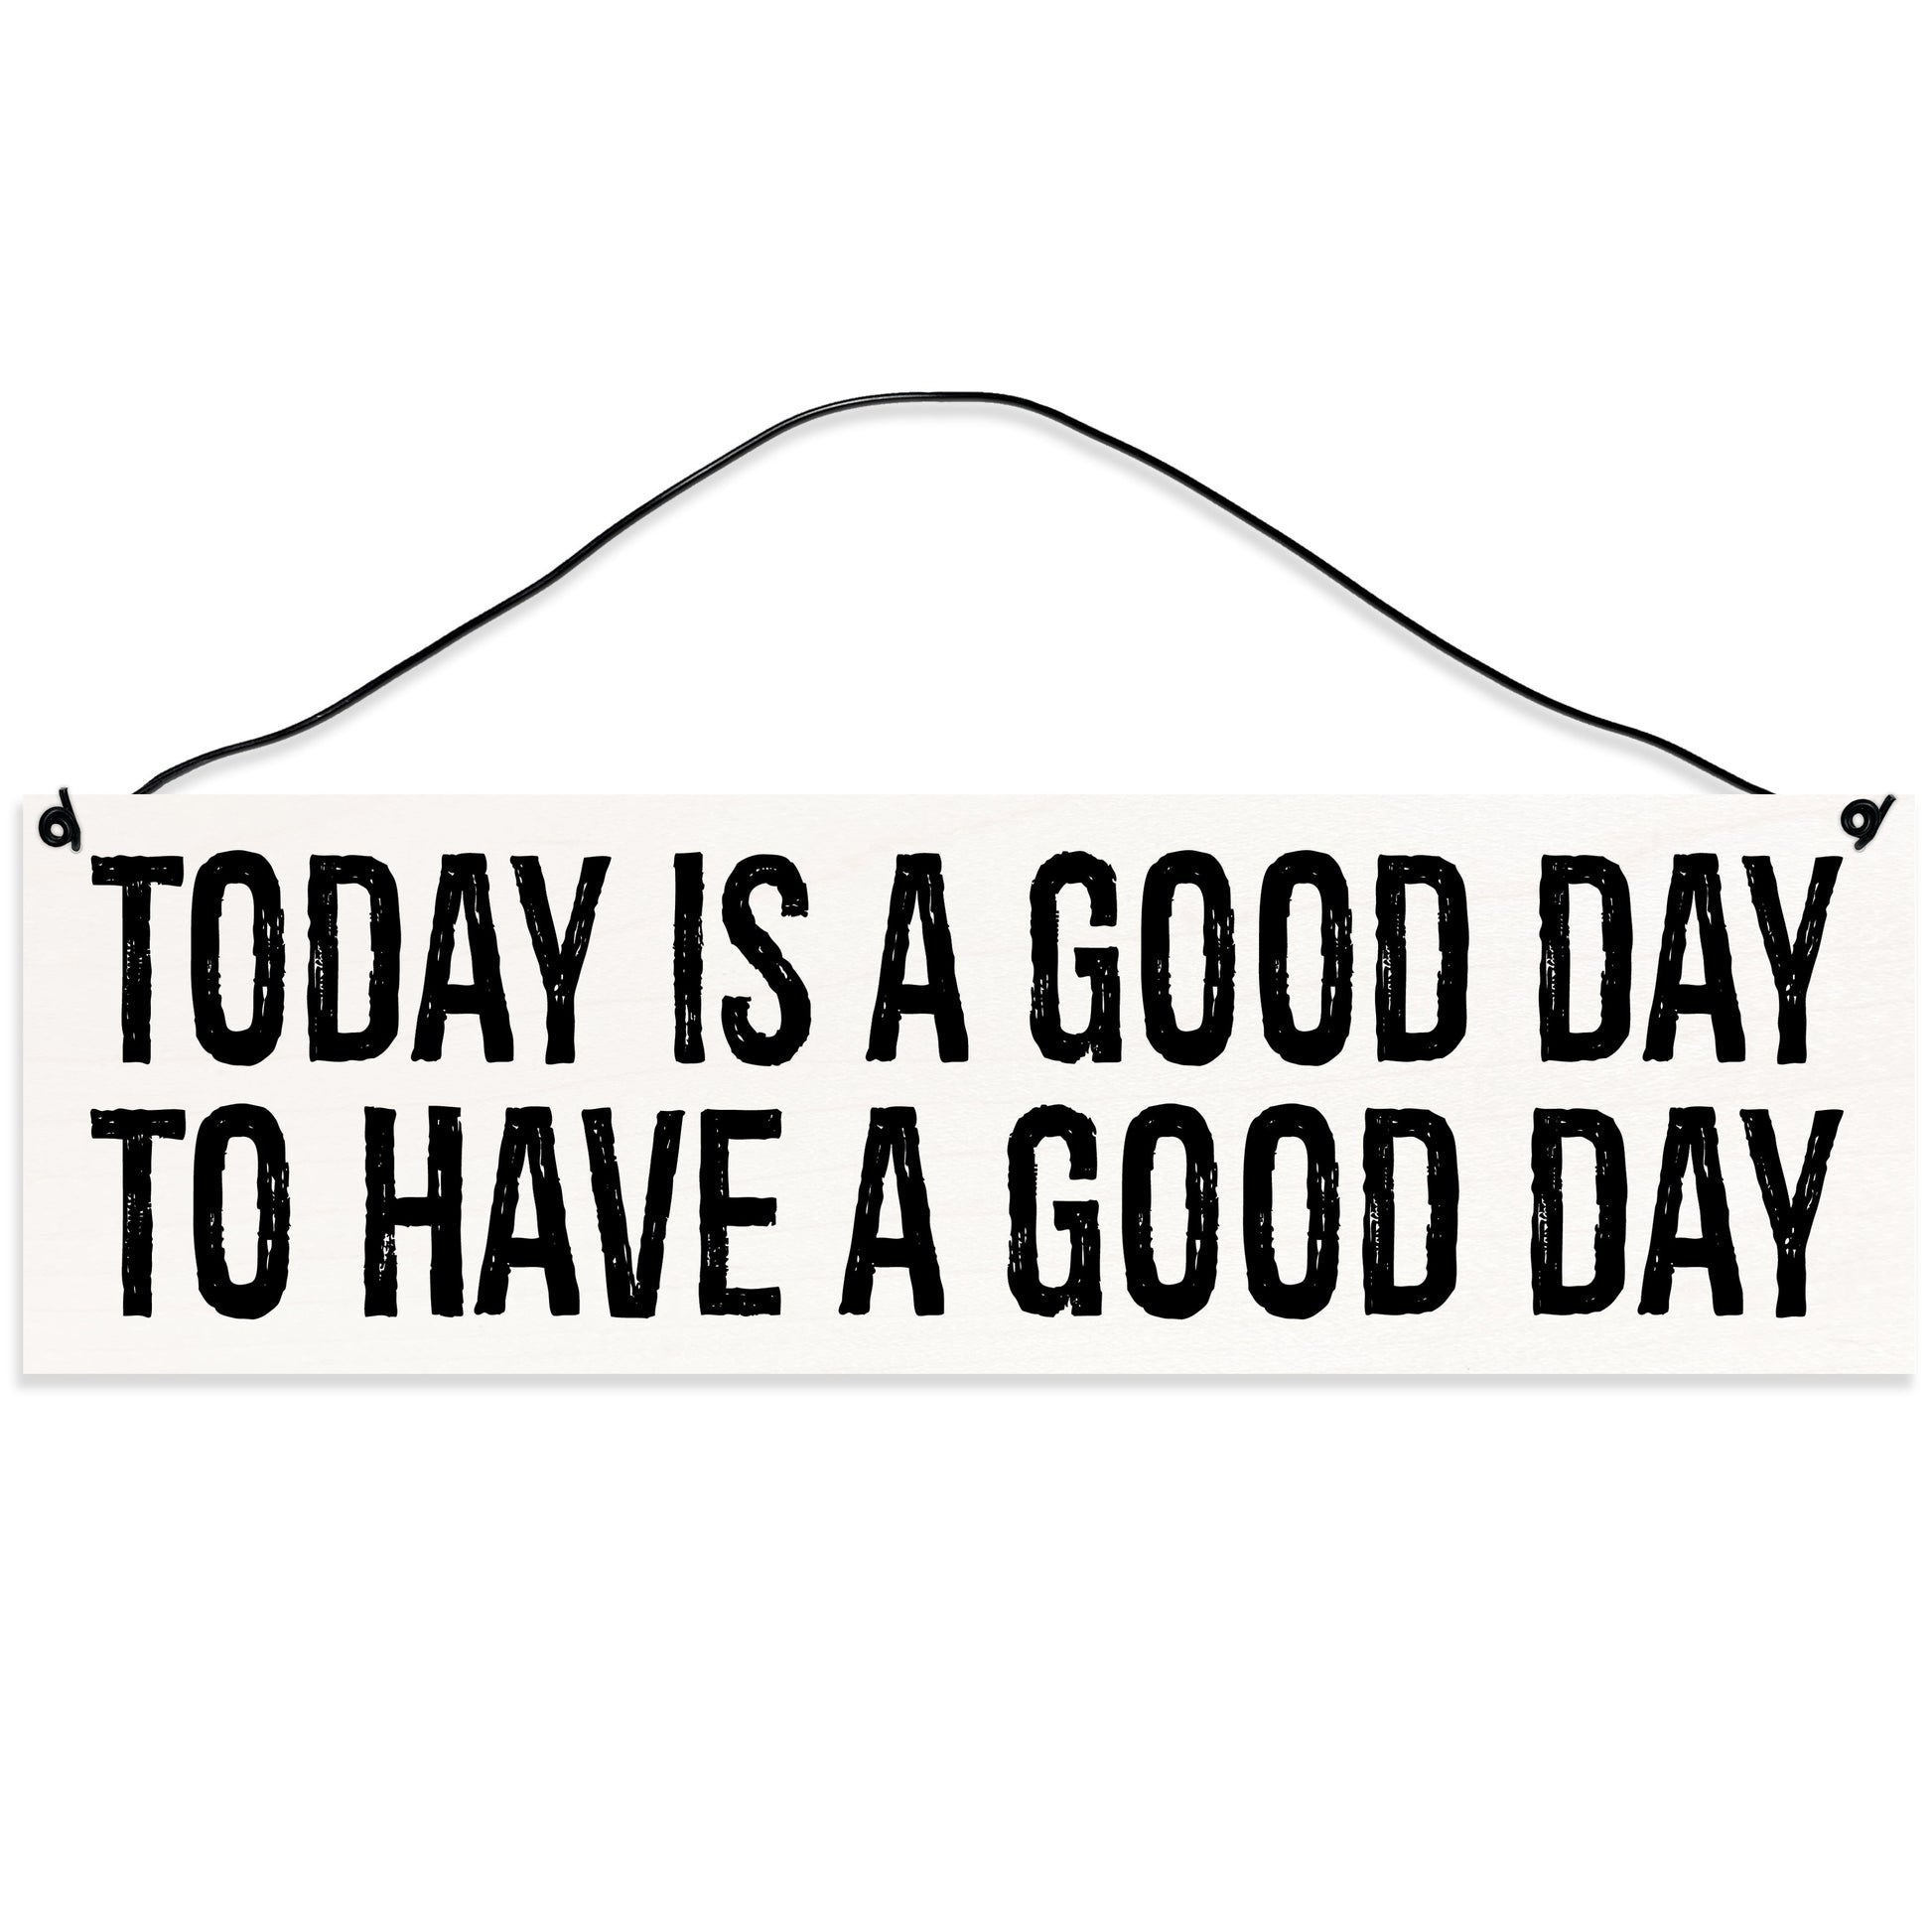 Sawyer's Mill - Today is a Good Day to Have a Good Day. Wood Sign for Home or Office. Measures 3x10 inches.